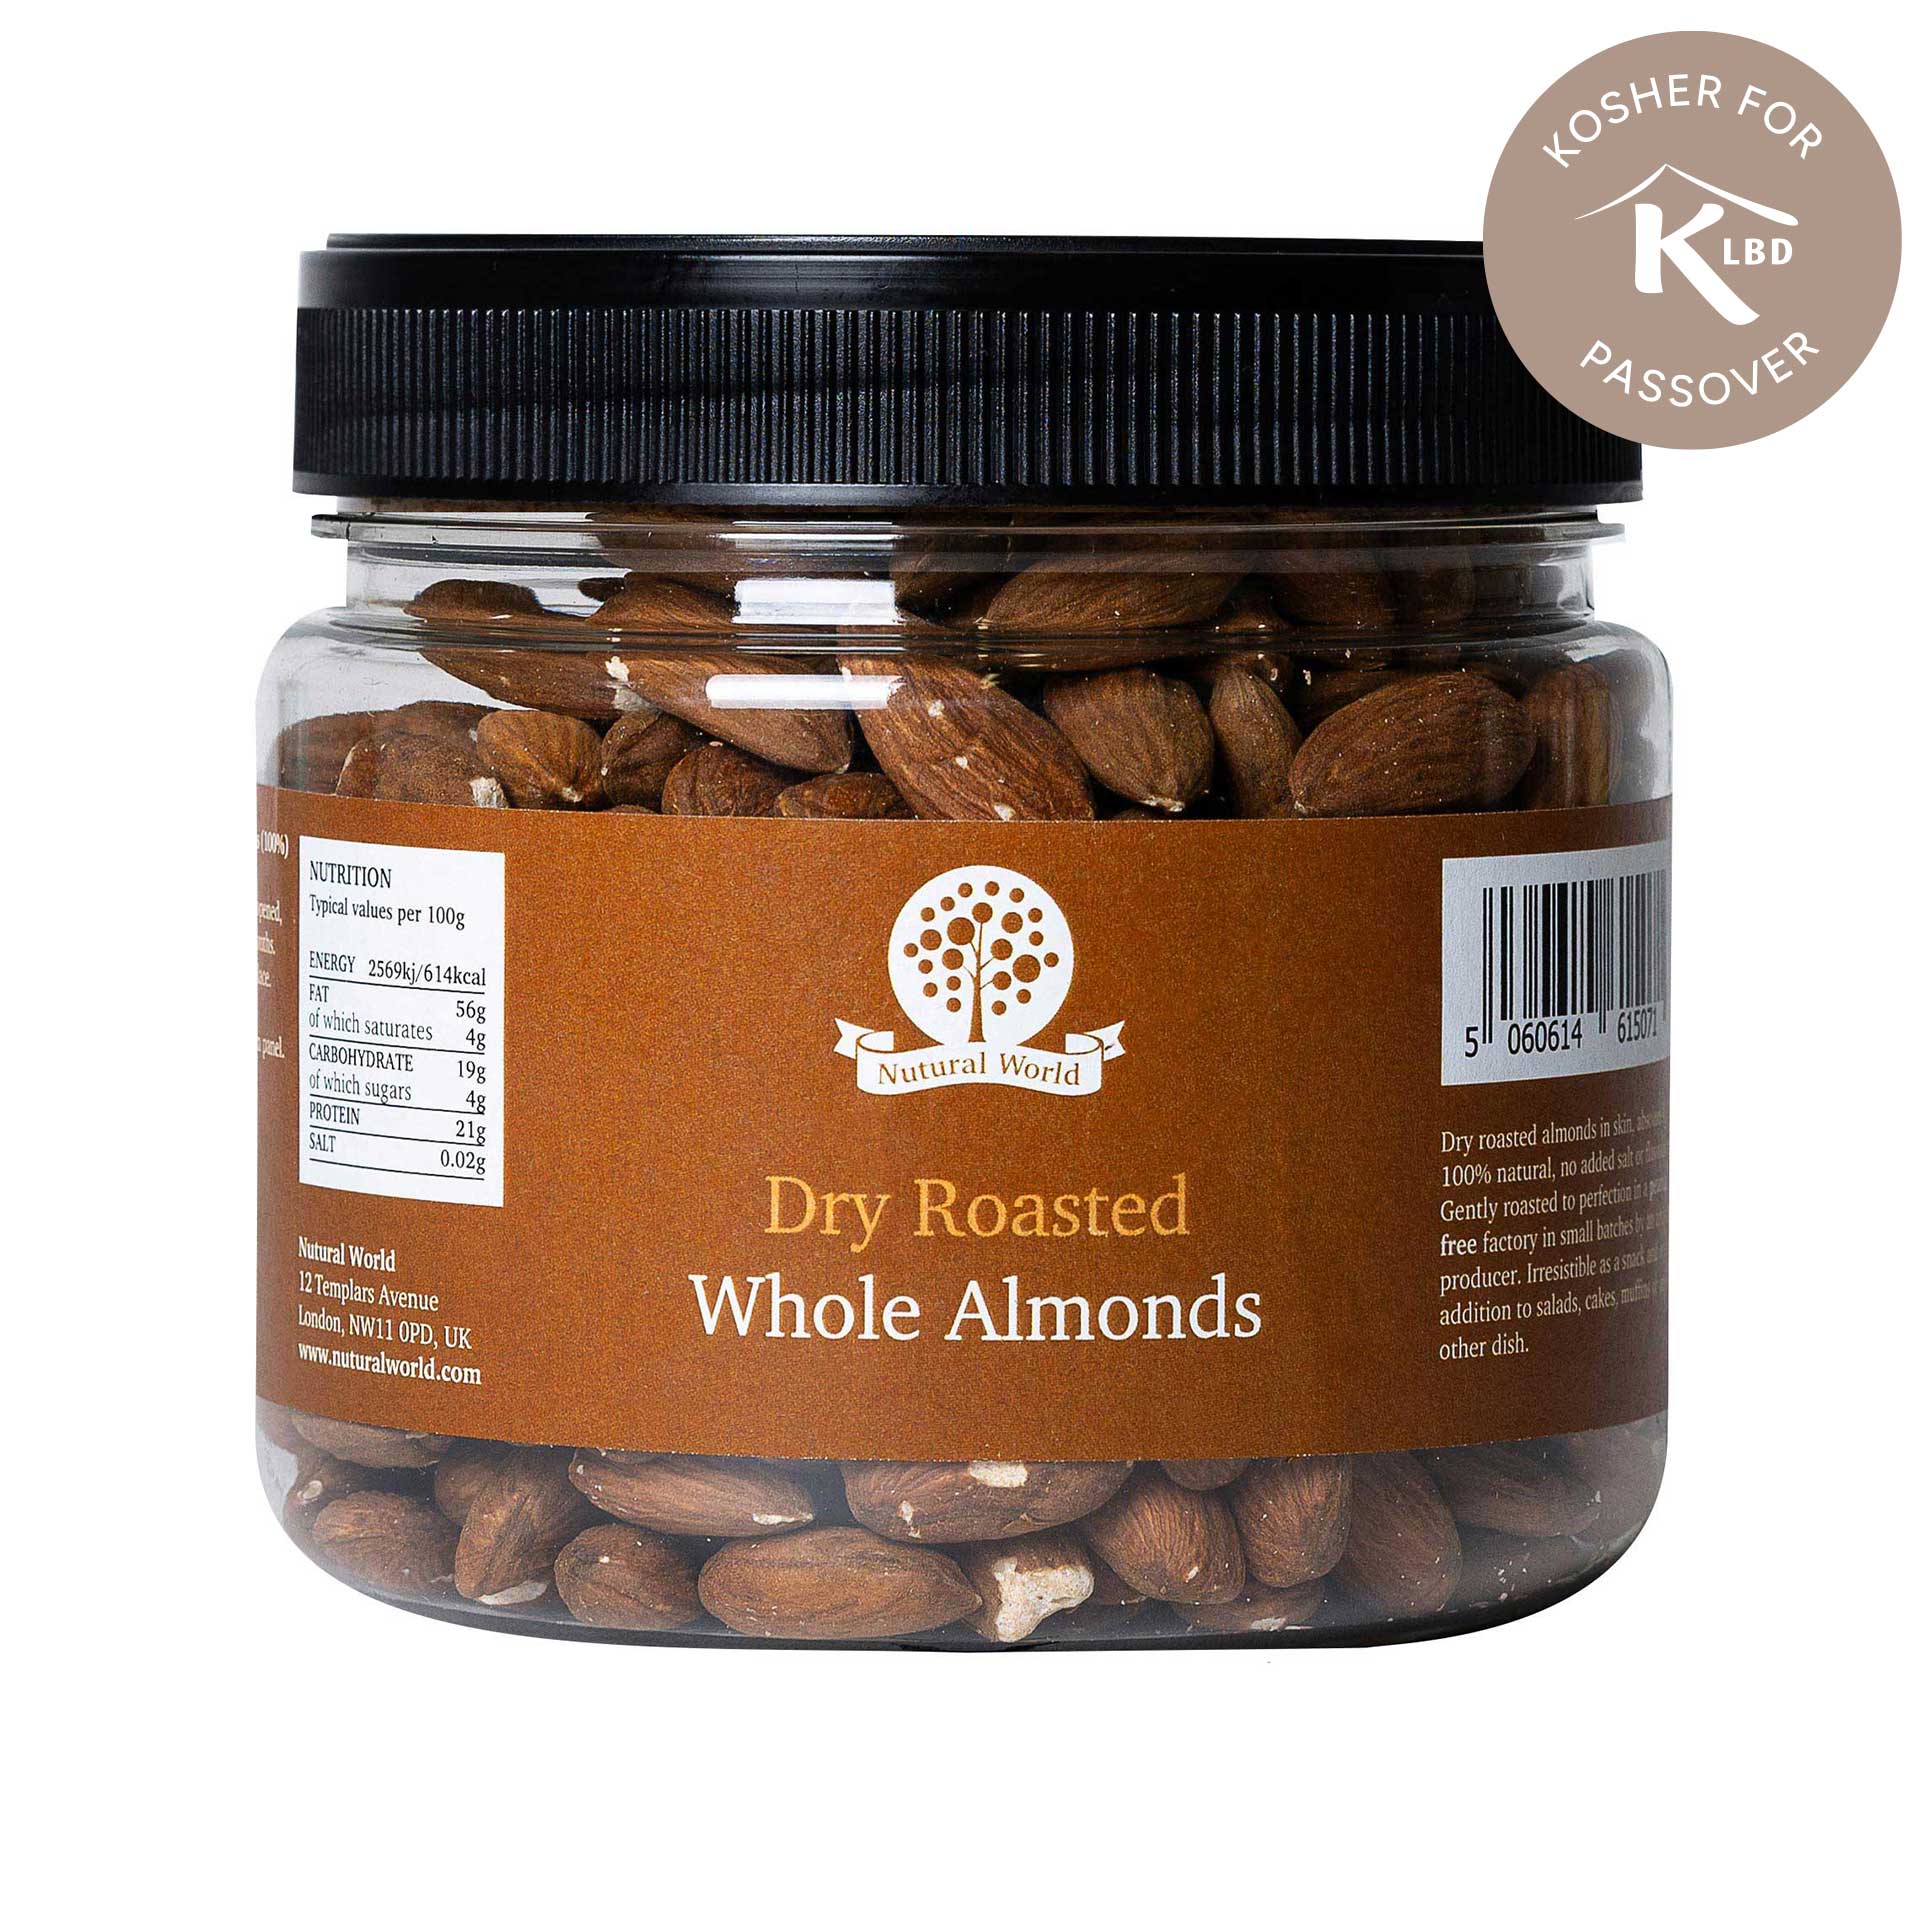 Dry Roasted Whole Almonds - Unsalted (500g) - Kosher for Passover